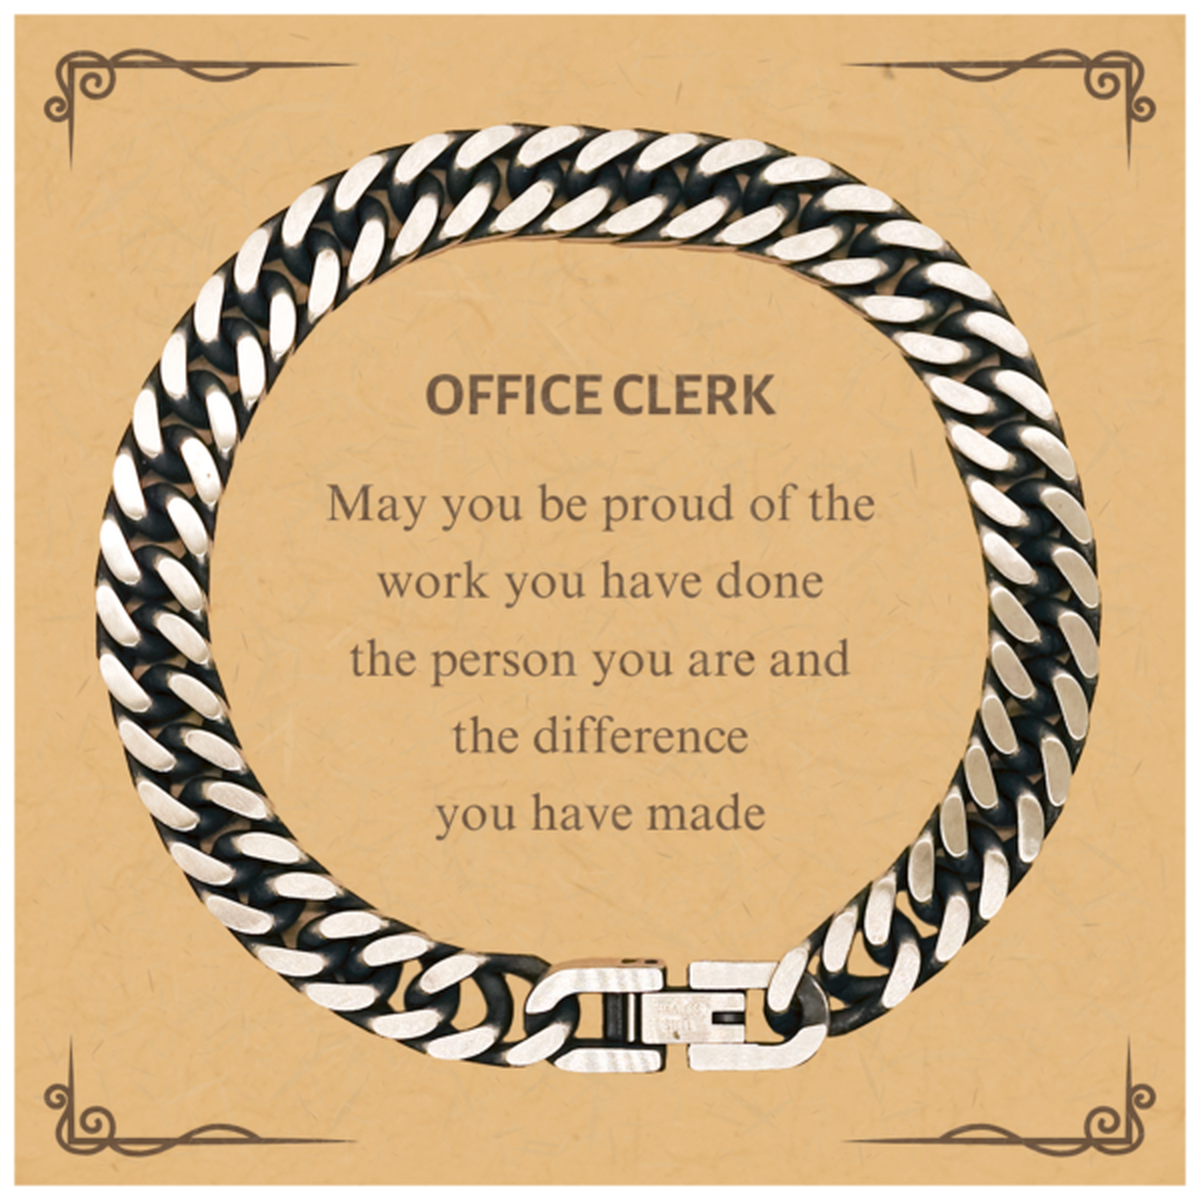 Office Clerk May you be proud of the work you have done, Retirement Office Clerk Cuban Link Chain Bracelet for Colleague Appreciation Gifts Amazing for Office Clerk